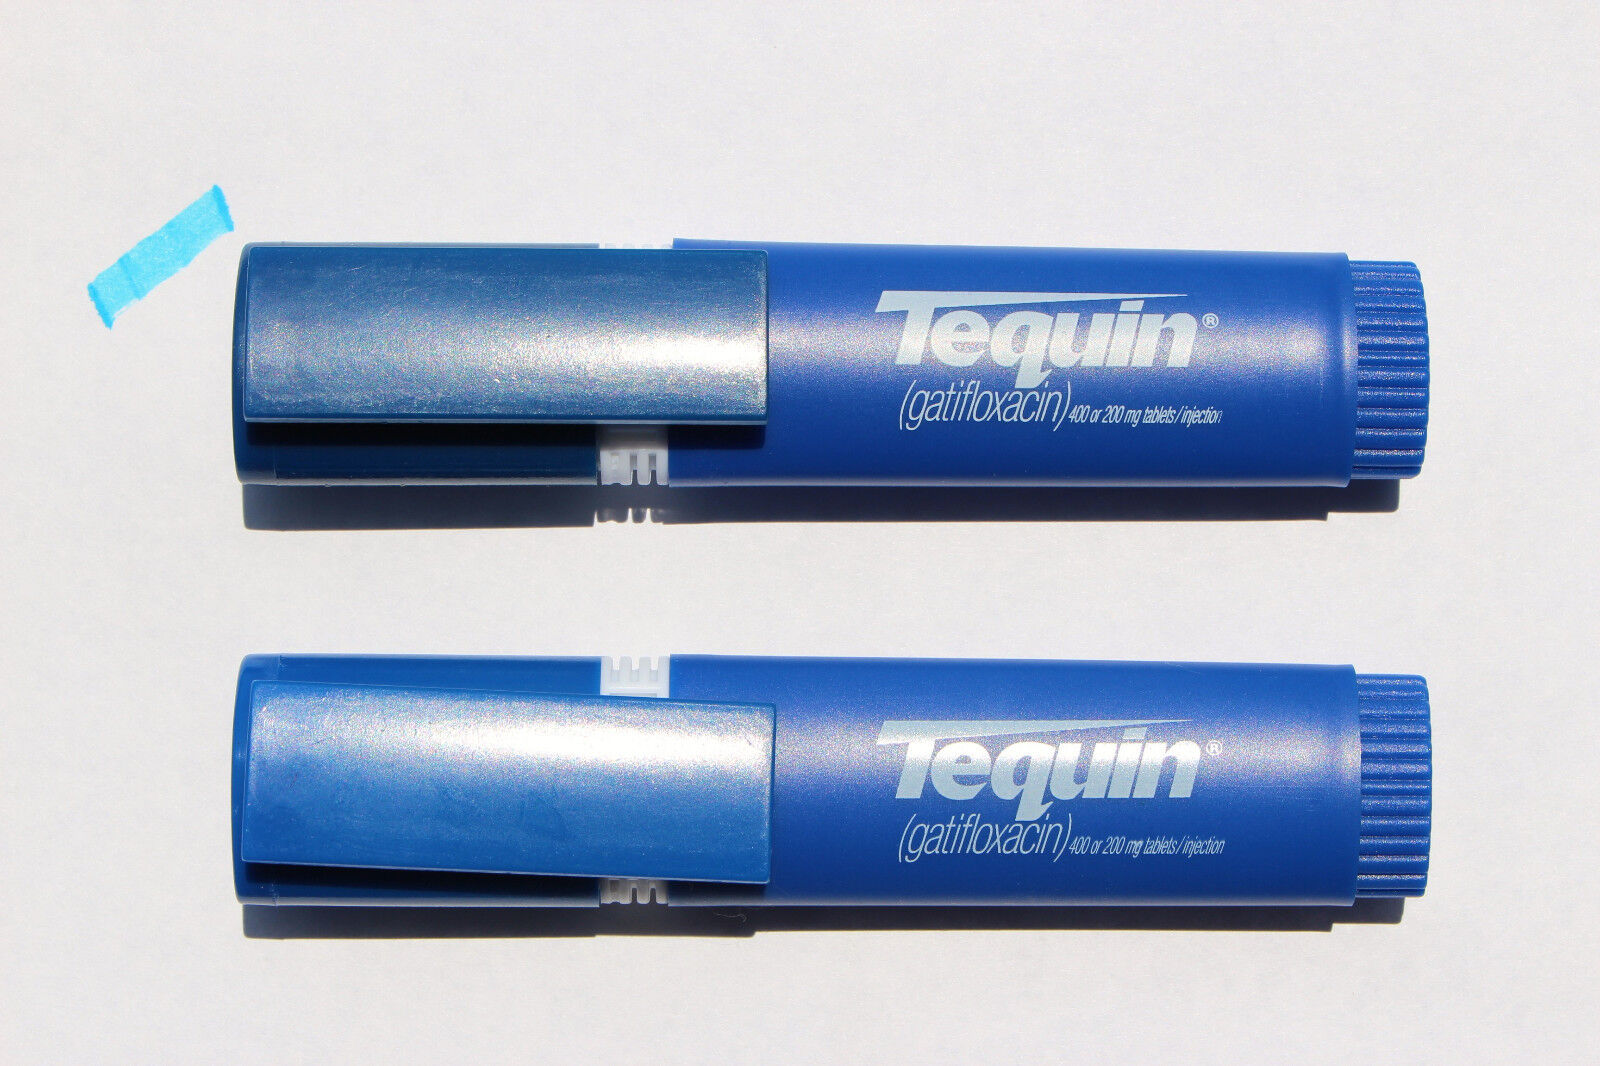 Drug Rep Pens   2  TEQUIN  Blue High-lighters  New  Rare Find